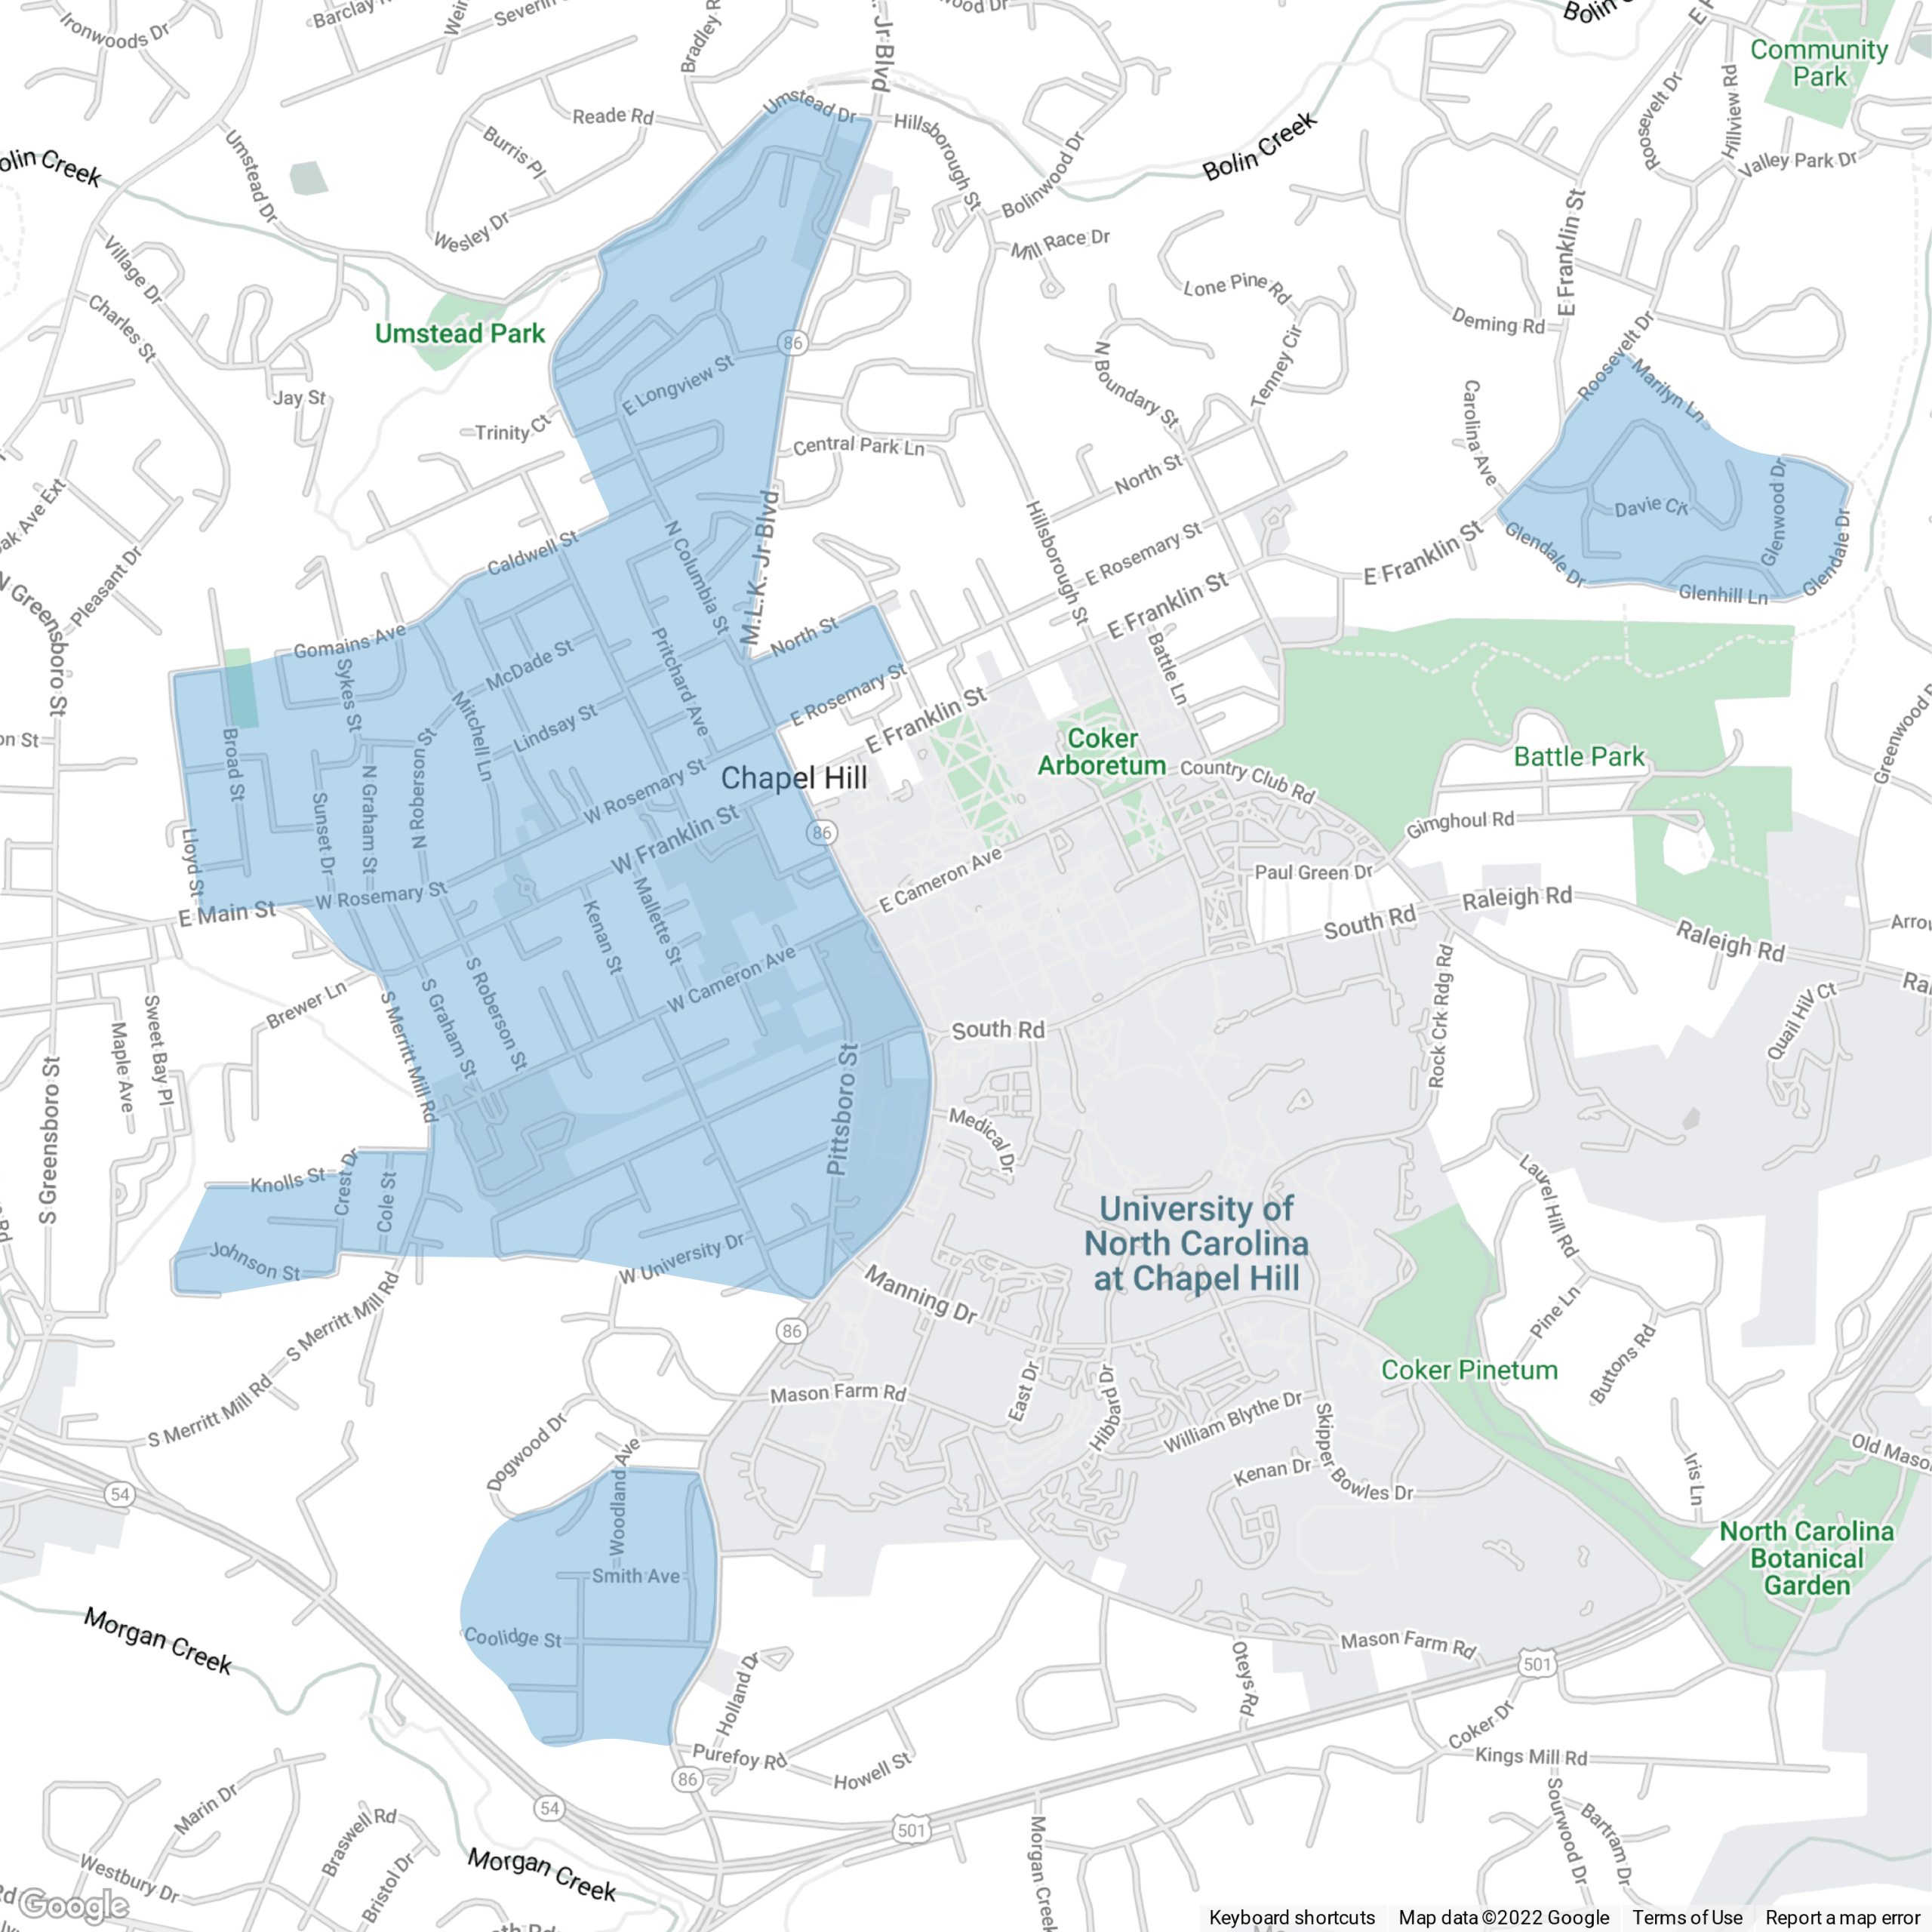 Map of downtown Chapel Hill and Carrboro showing Good Neighbor Initiative areas shaded in blue.